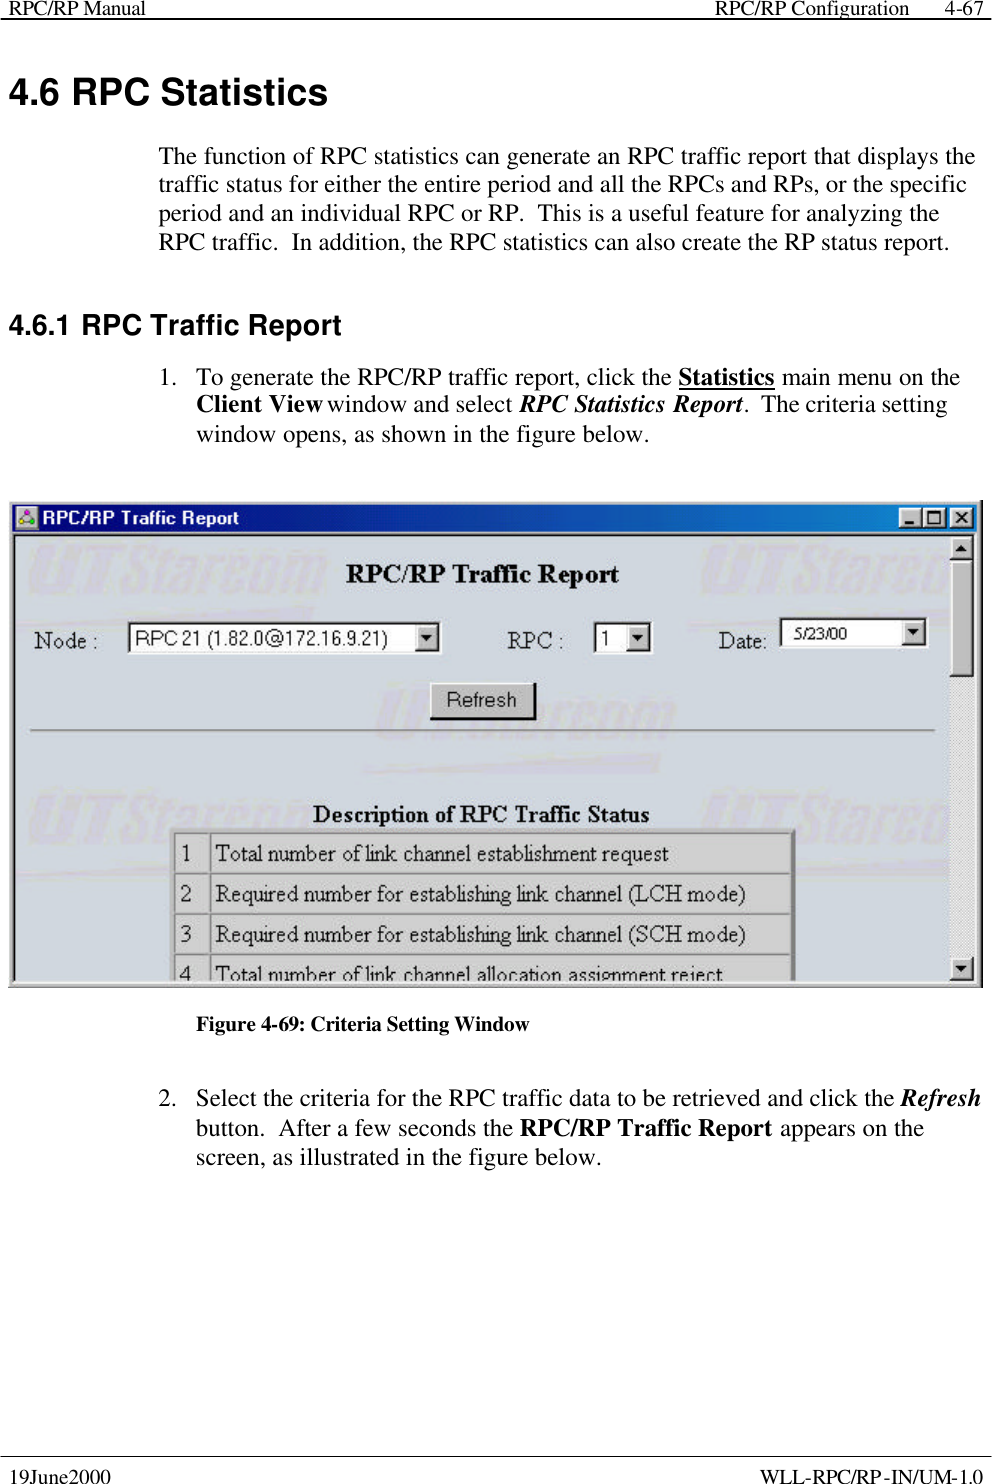 RPC/RP Manual    RPC/RP Configuration 19June2000    WLL-RPC/RP-IN/UM-1.0 4-674.6 RPC Statistics The function of RPC statistics can generate an RPC traffic report that displays the traffic status for either the entire period and all the RPCs and RPs, or the specific period and an individual RPC or RP.  This is a useful feature for analyzing the RPC traffic.  In addition, the RPC statistics can also create the RP status report. 4.6.1 RPC Traffic Report 1.  To generate the RPC/RP traffic report, click the Statistics main menu on the Client View window and select RPC Statistics Report.  The criteria setting window opens, as shown in the figure below.  Figure 4-69: Criteria Setting Window 2.  Select the criteria for the RPC traffic data to be retrieved and click the Refresh button.  After a few seconds the RPC/RP Traffic Report appears on the screen, as illustrated in the figure below.   